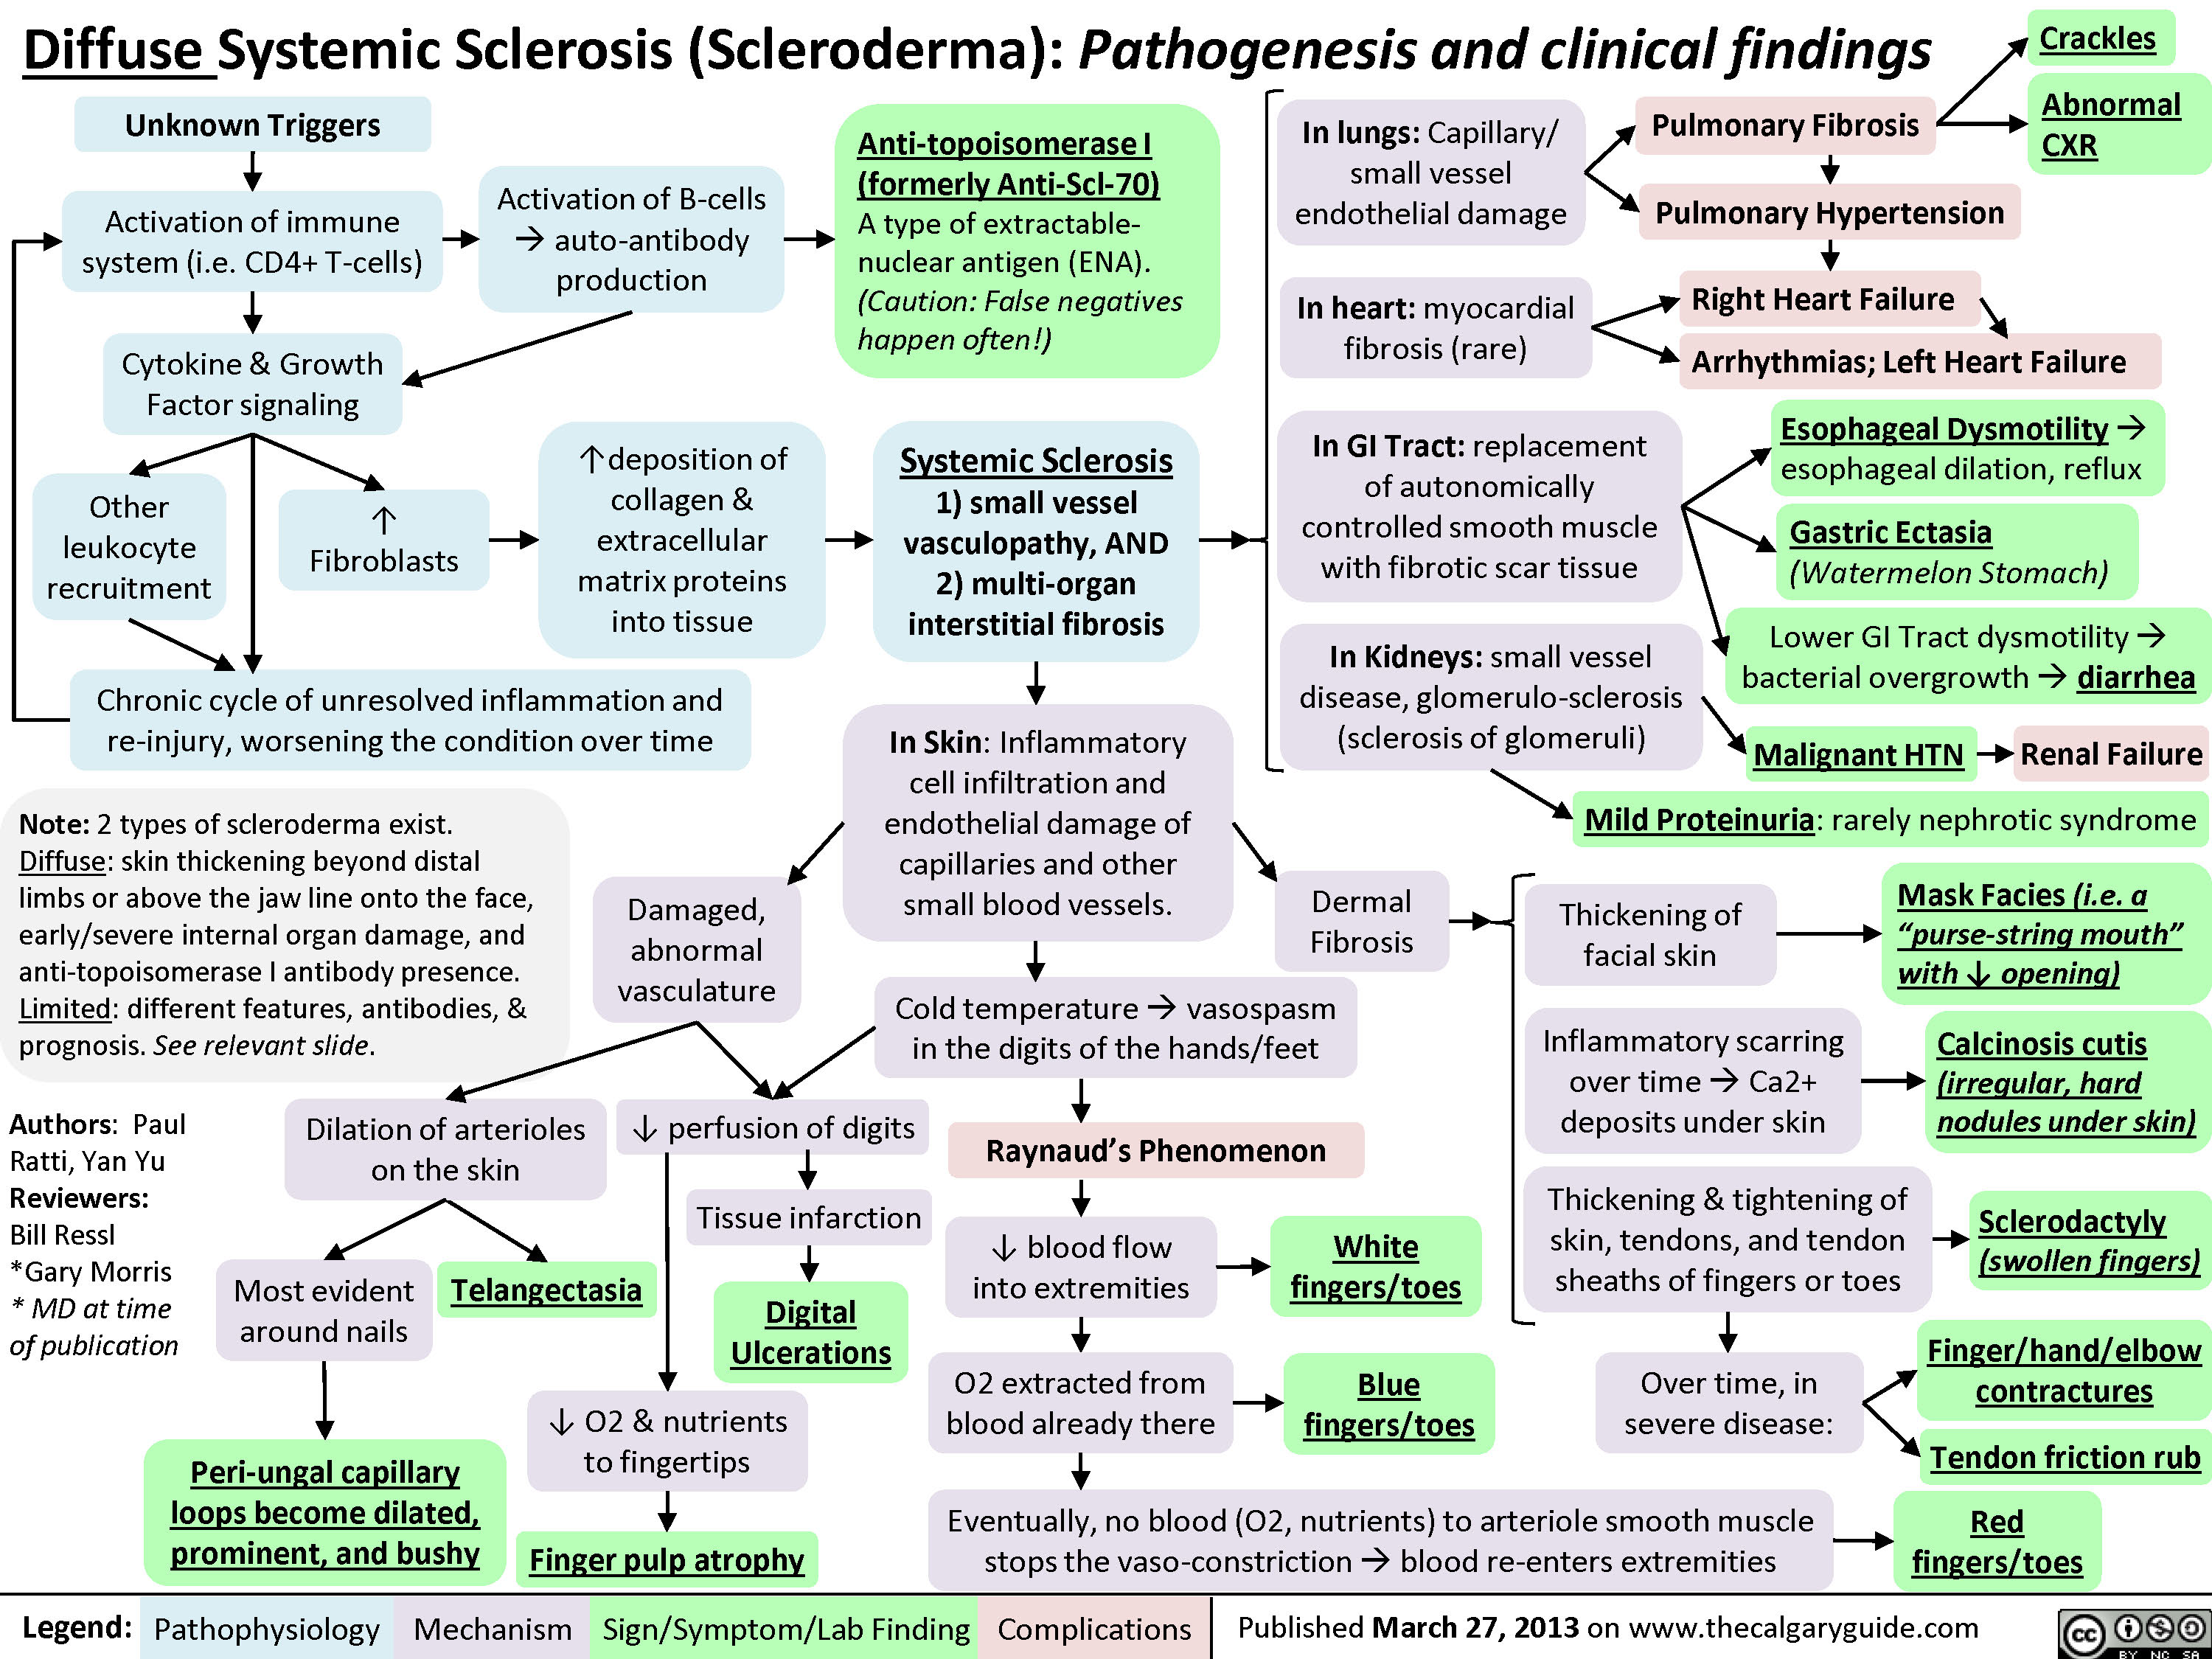 Diffuse Systemic Sclerosis (Scleroderma)